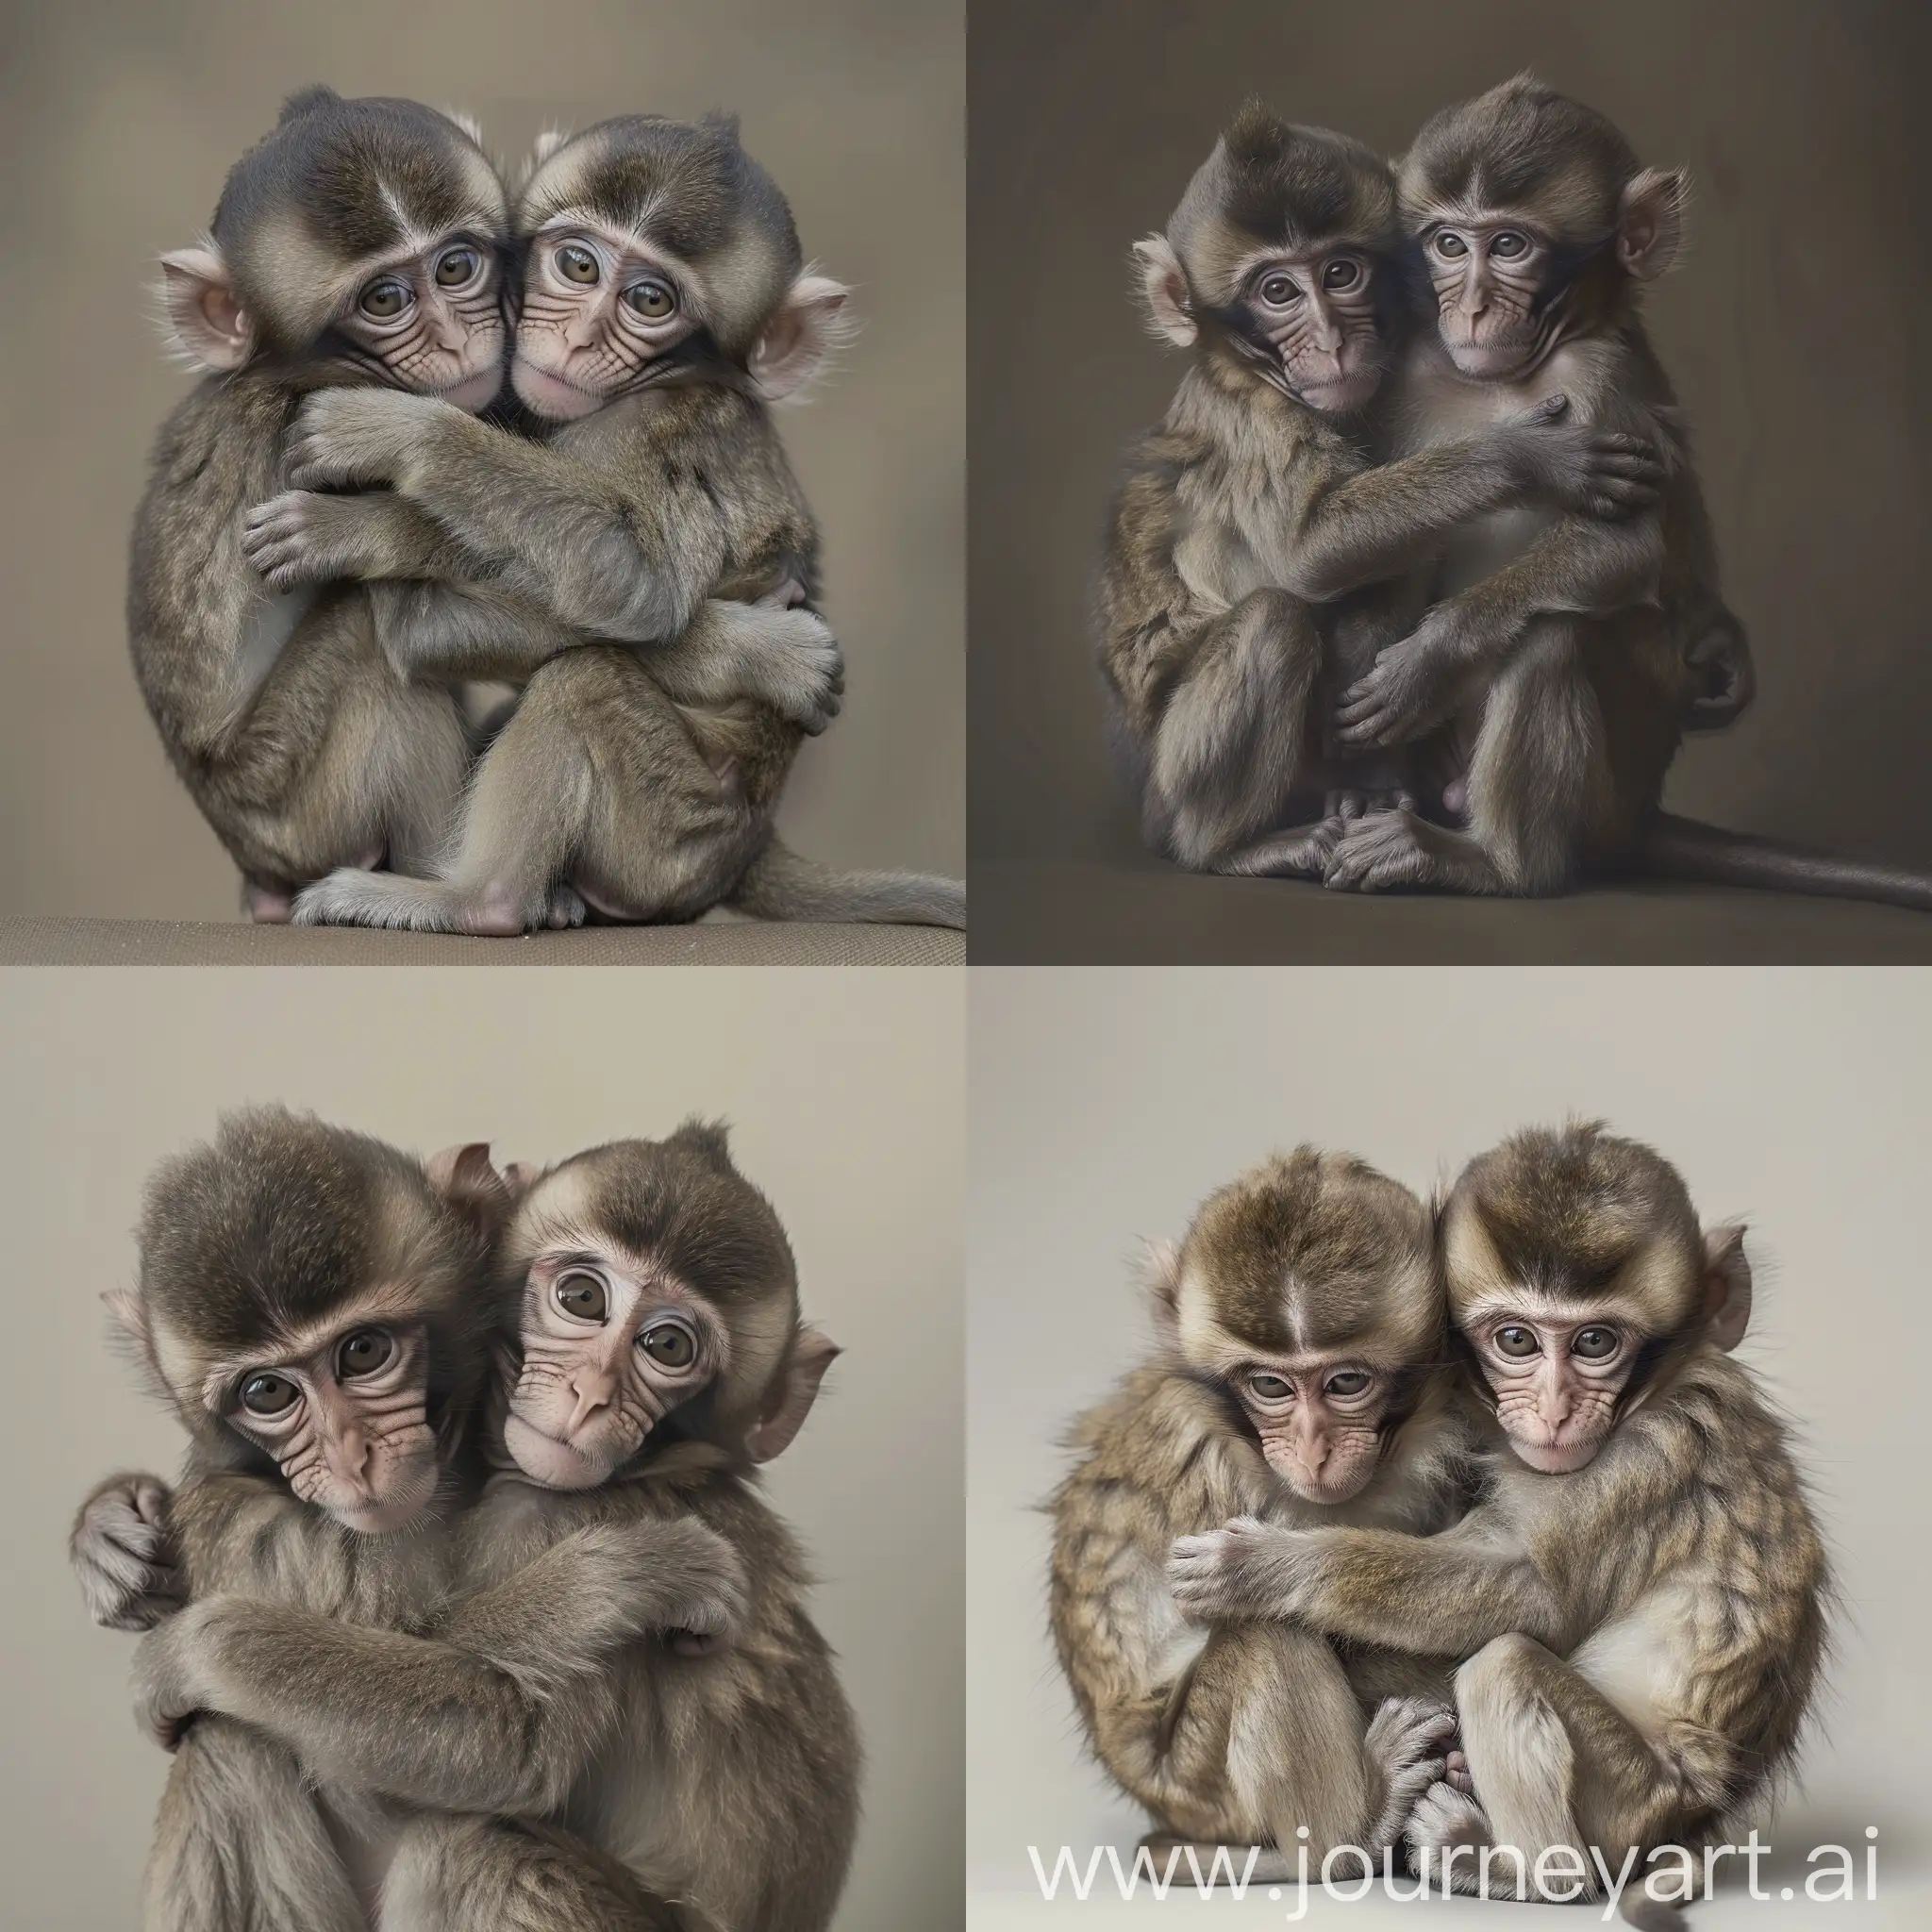 Cute-Baby-Macaques-Cuddling-in-Natural-Tones